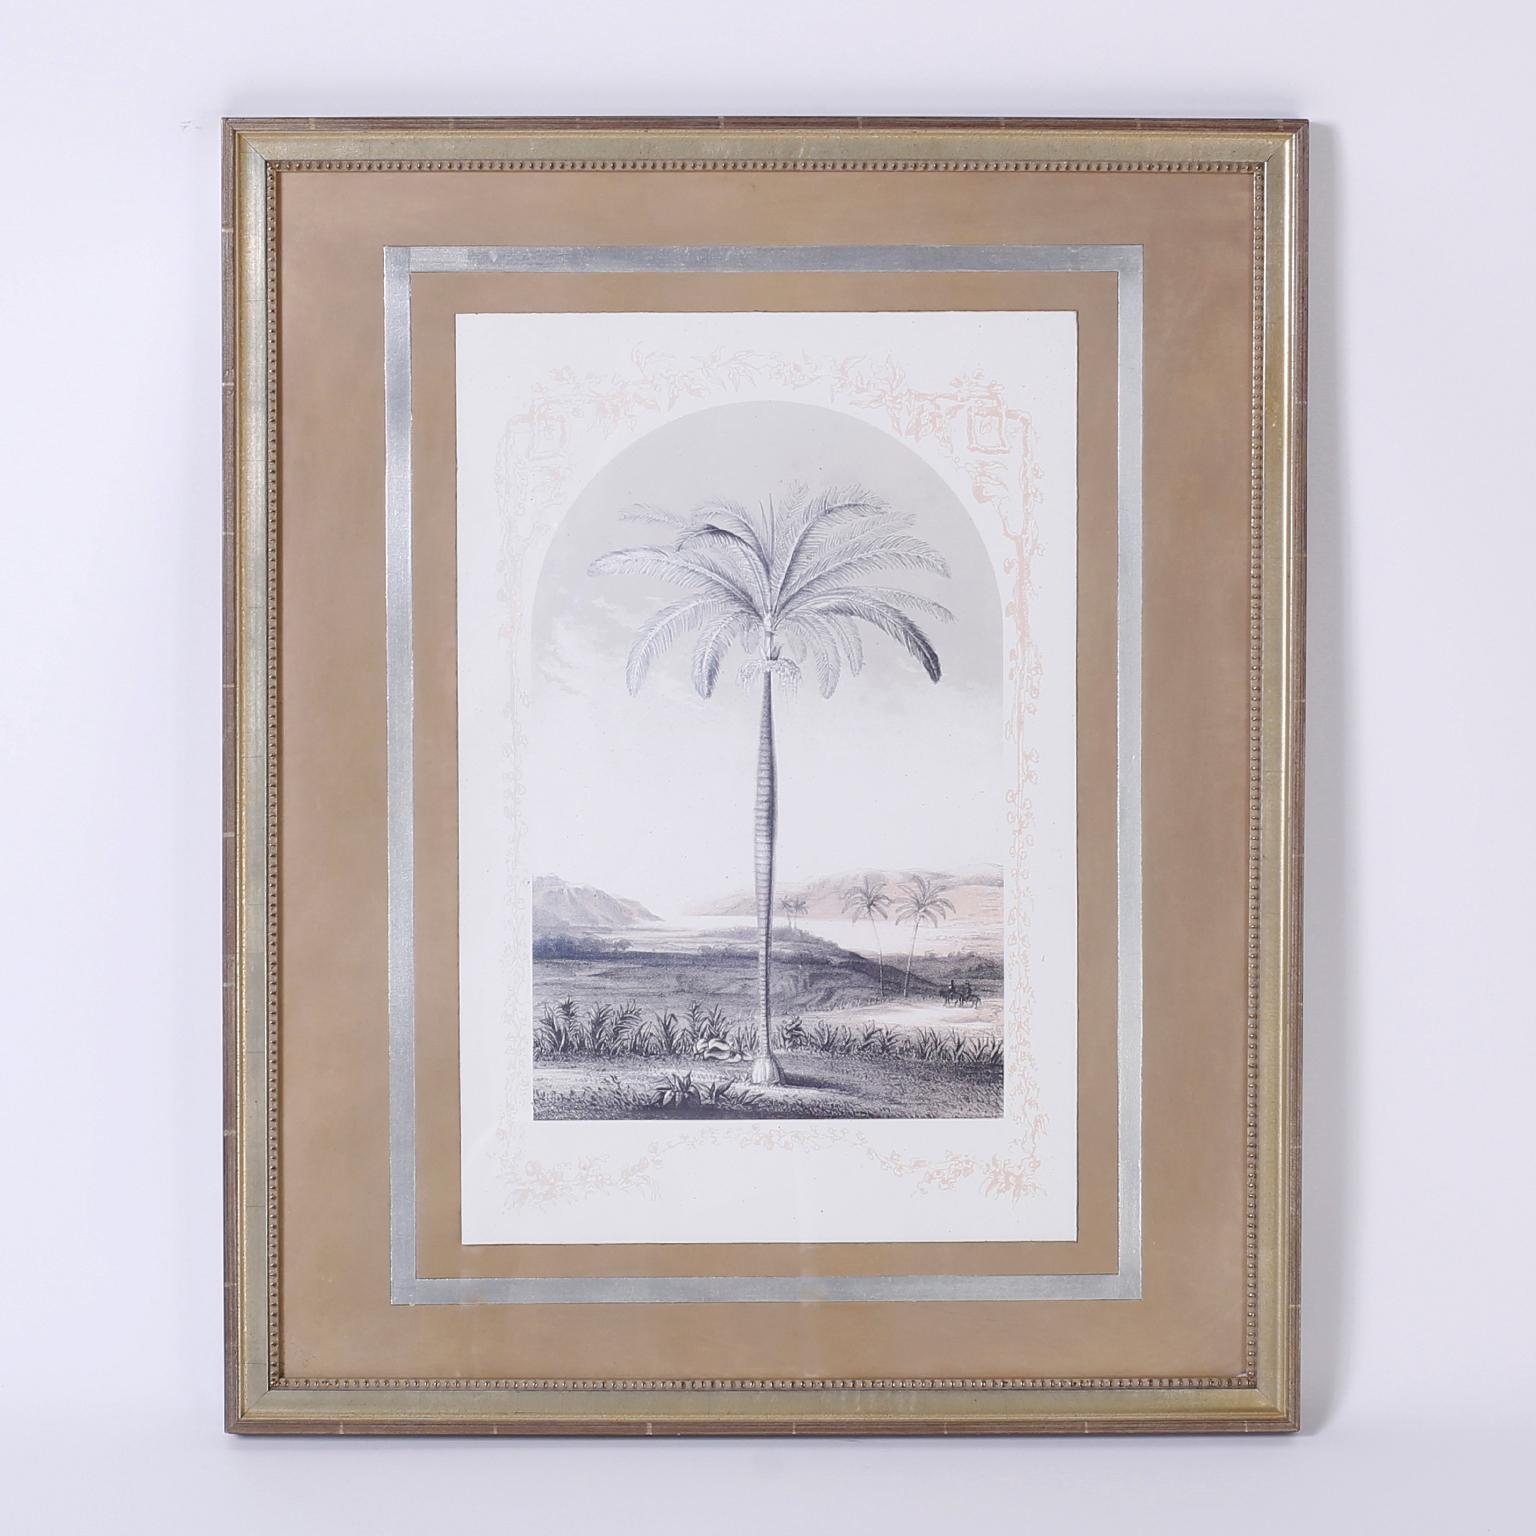 Pair of scholastic style dome shaped lithographs depicting Palm Tree species in their natural Habitat, matted and presented in carved wood gold leaf frames.